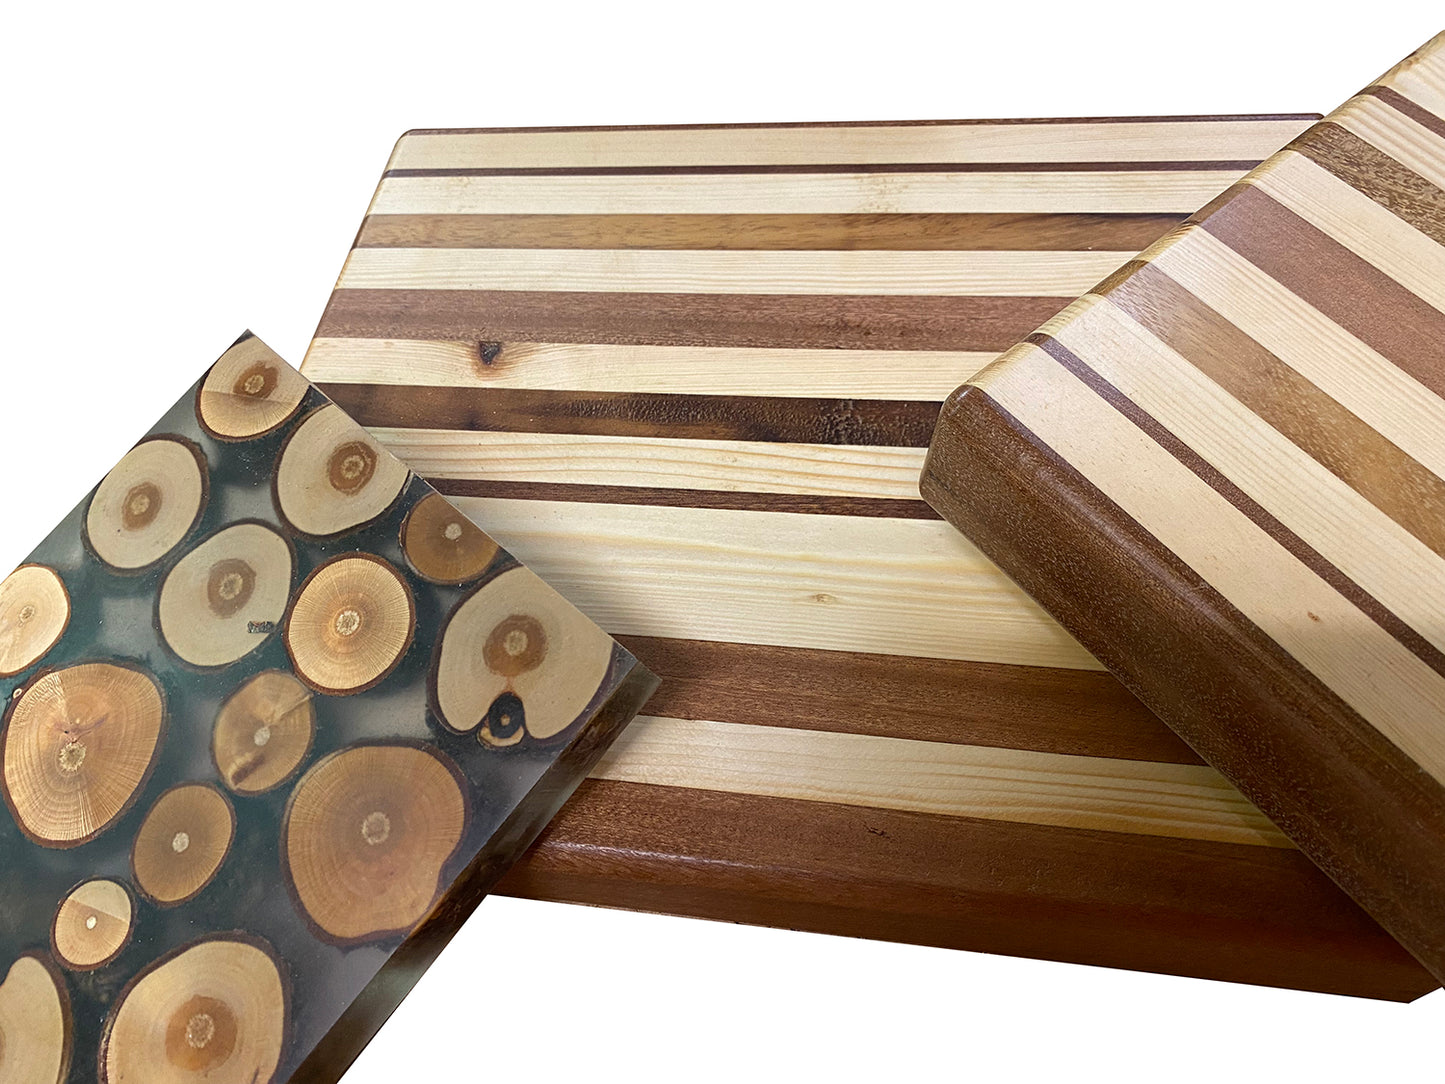 Chopping Board. Mixed hardwood and Pine. Very solid piece